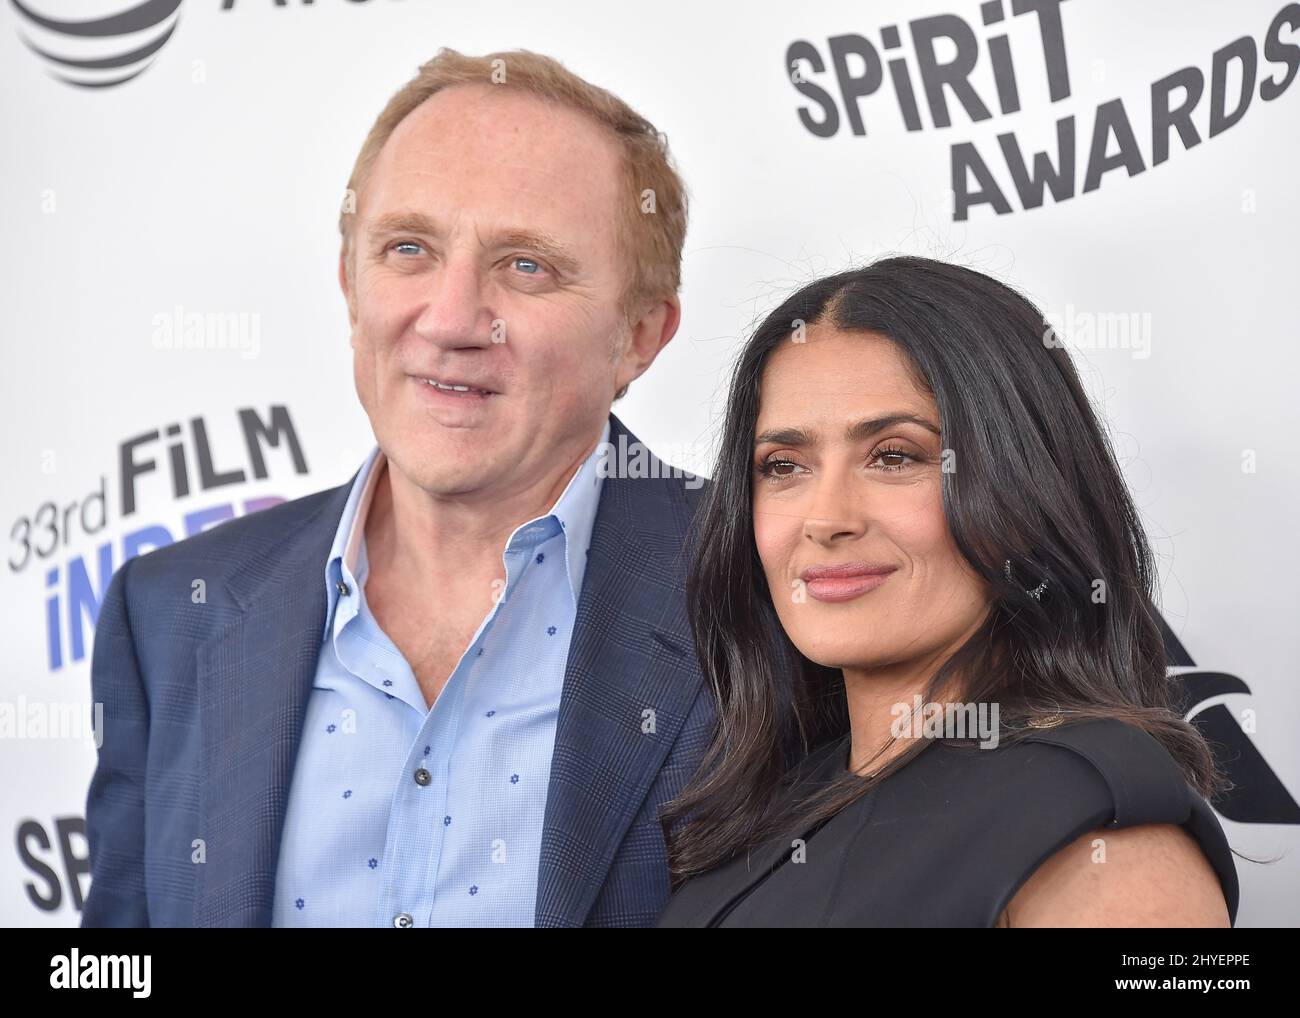 Salma Hayek and Francois-Henri Pinault at the 2018 Film Independent Spirit Awards held in a tent on Santa Monica beach on March 3, 2018 in Santa Monica, CA. Stock Photo